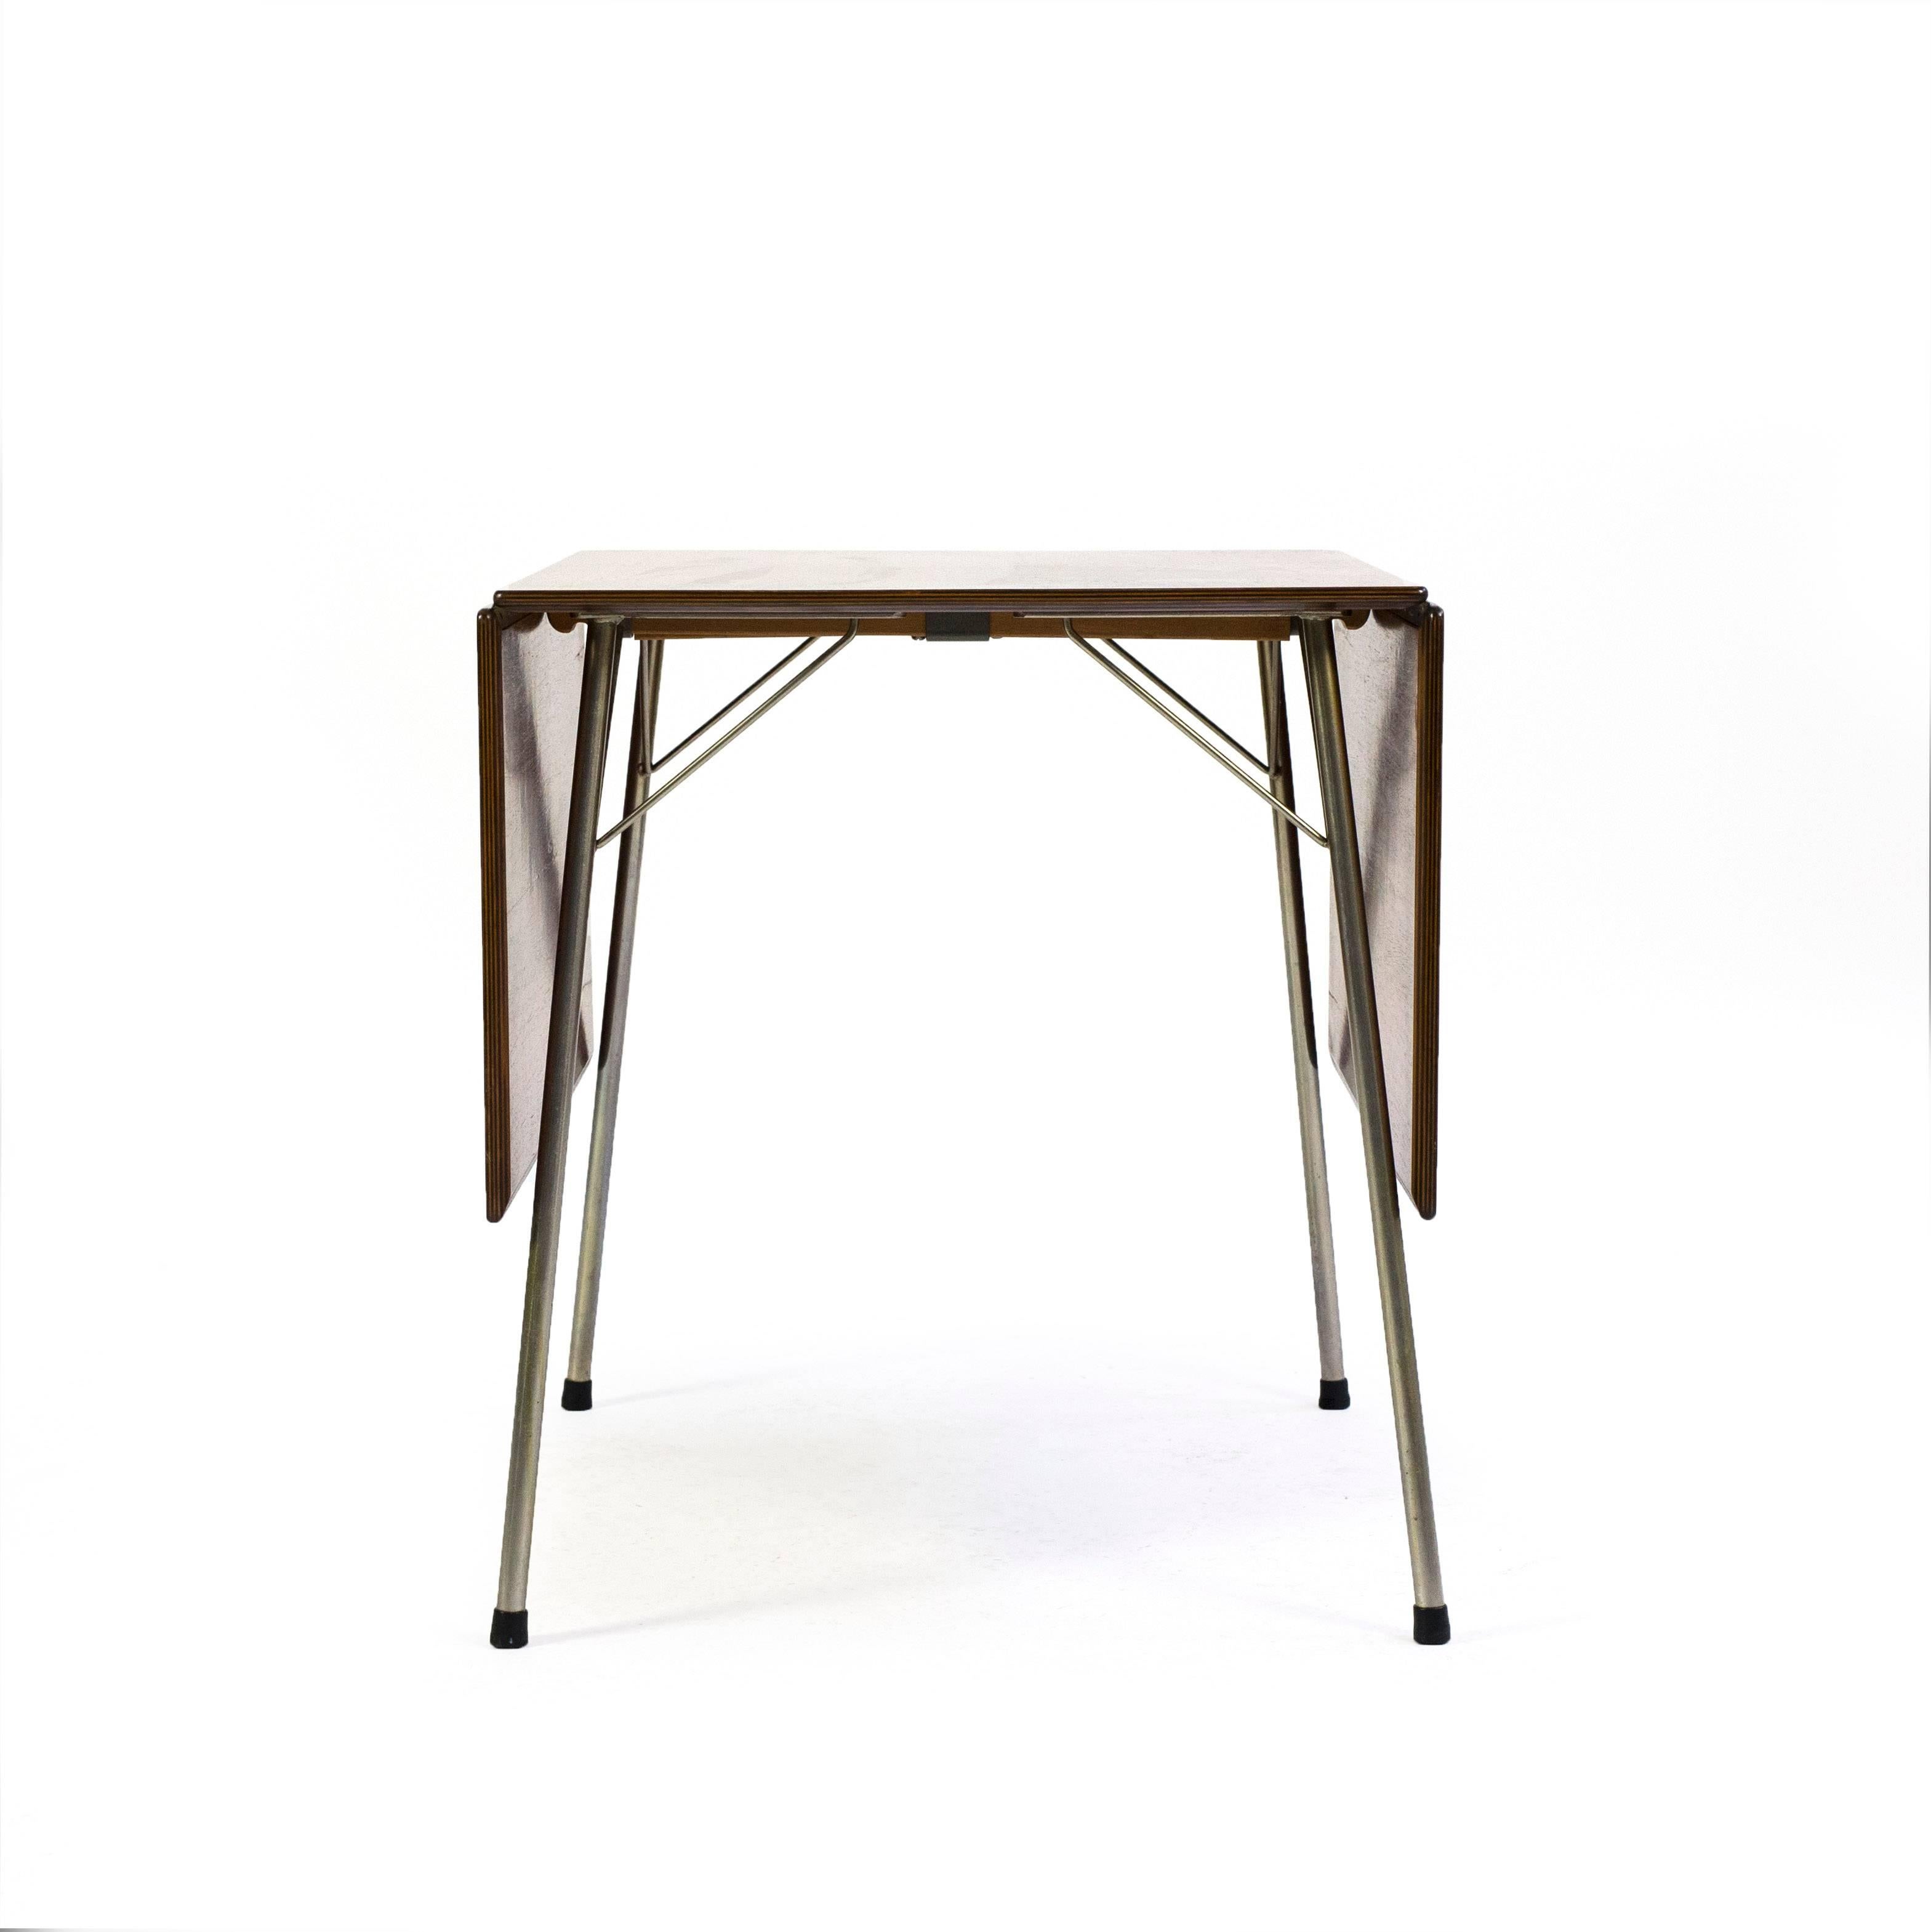 Arne Jacobsen Rosewood drop-leaf table. 

Table top and two drop-leafs of Rosewood, frame of Chromed plated steel. 

Designed by Arne Jacobsen and manufactured by Fritz Hansen as model 3601. 

Very fine condition. 